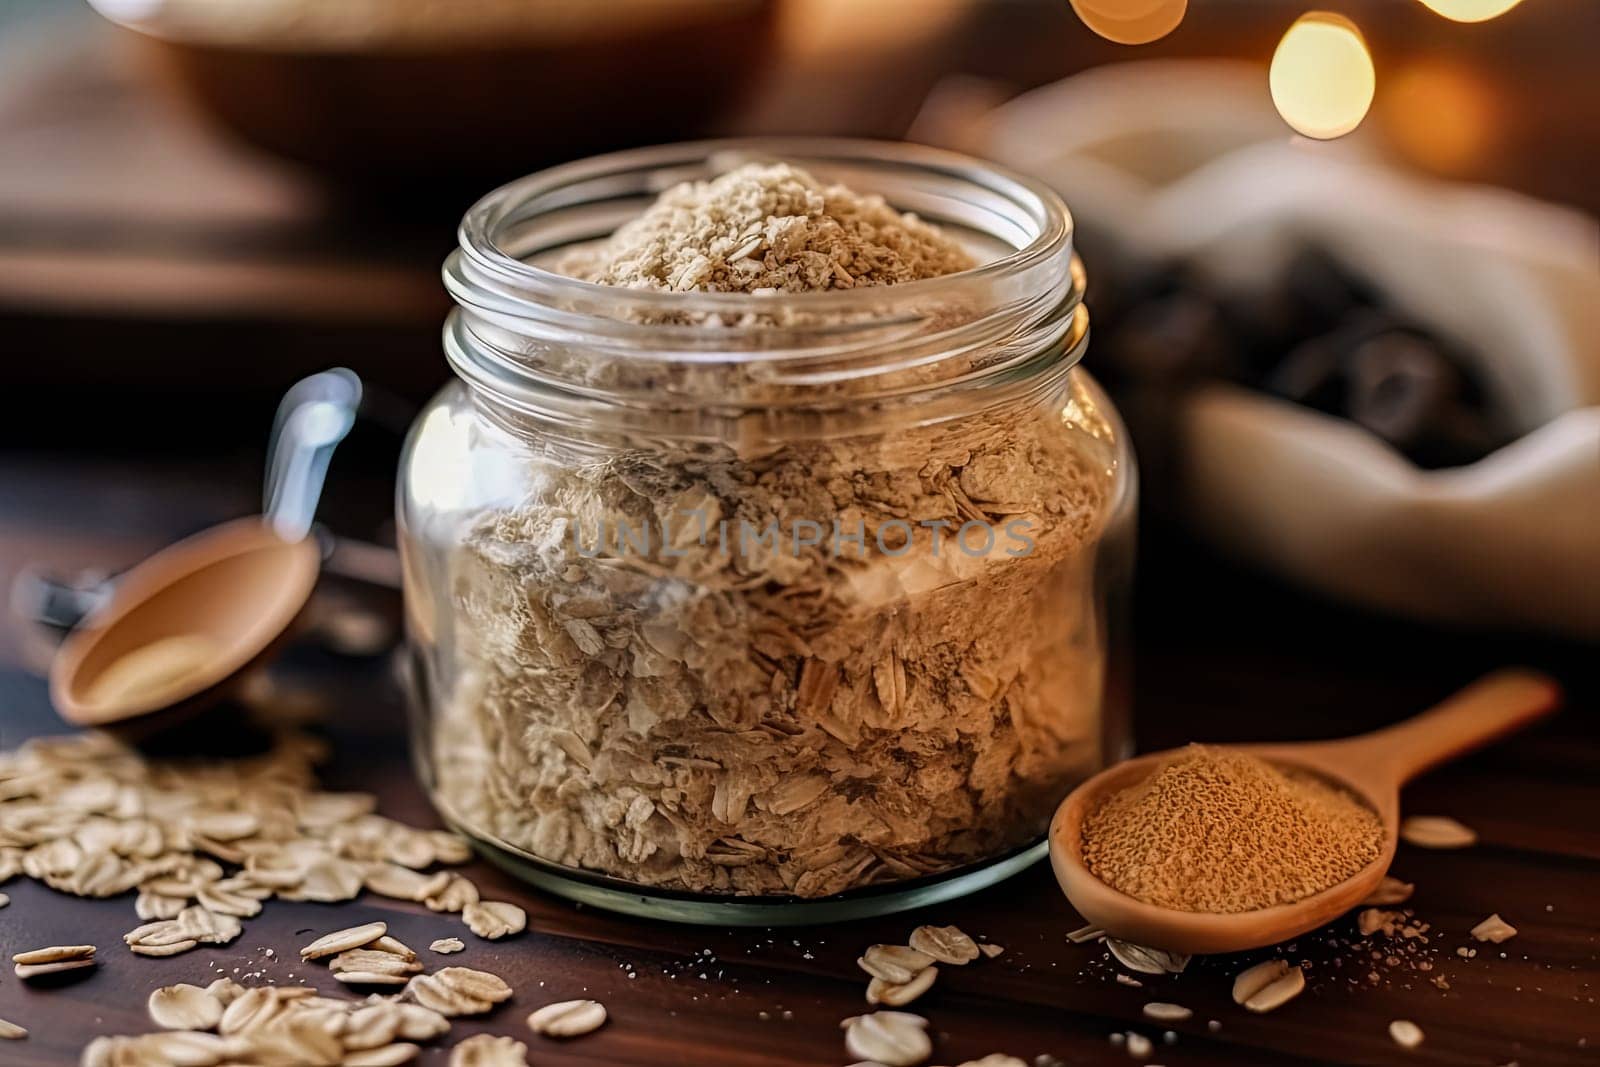 A jar of oatmeal is on a table with a spoon and a pile of oatmeal. The jar is half full and the oatmeal is scattered around it